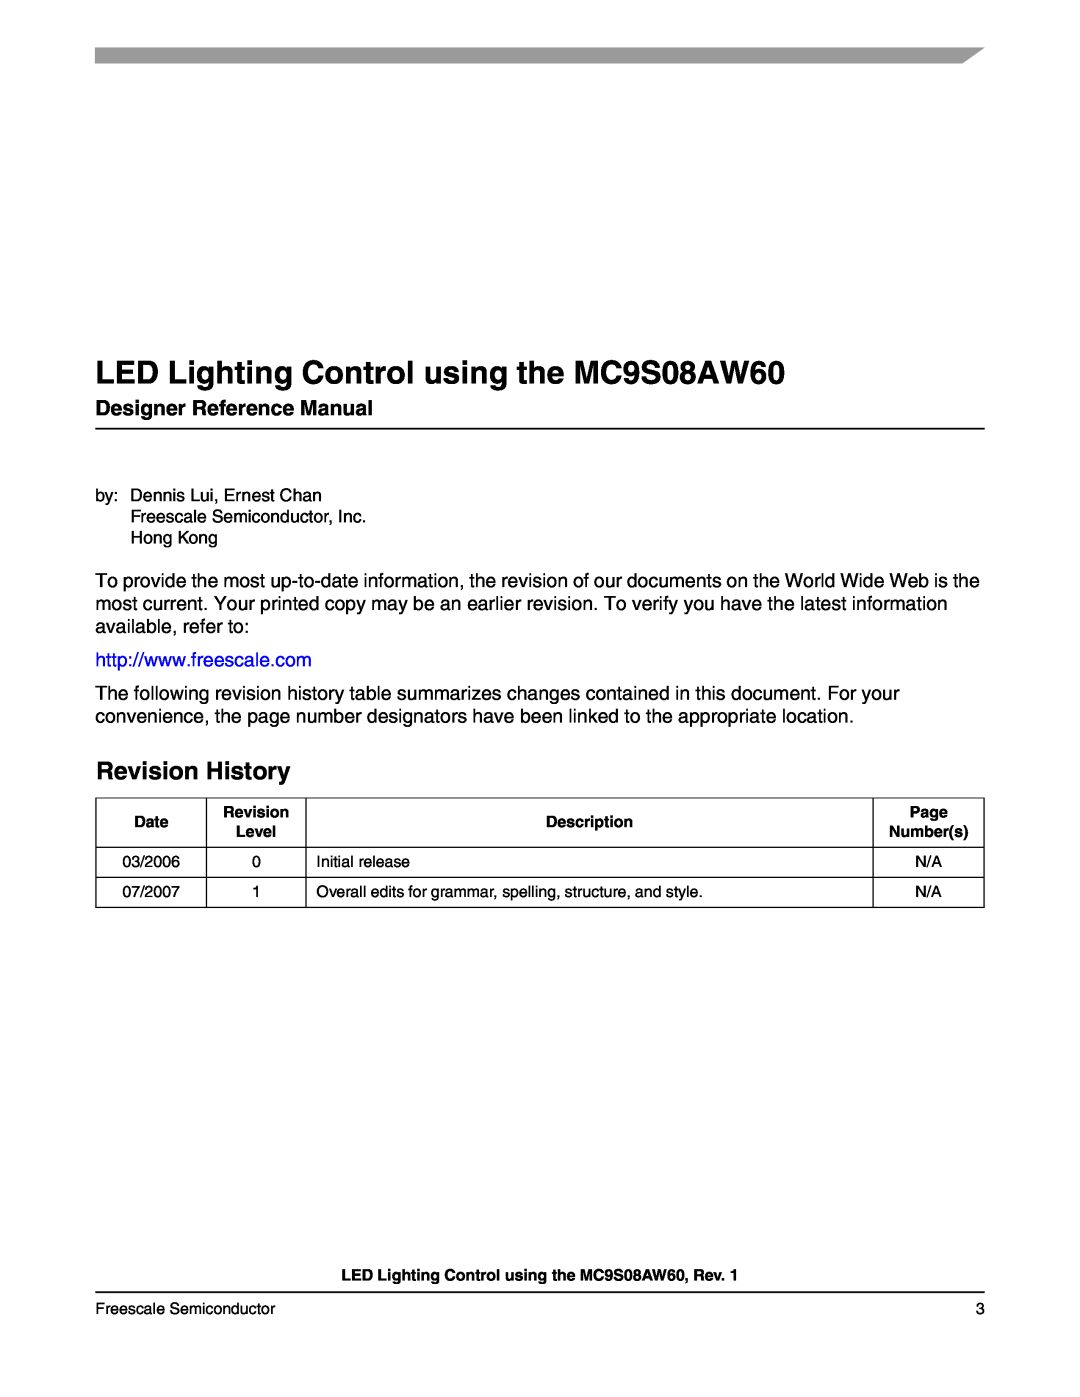 Freescale Semiconductor manual LED Lighting Control using the MC9S08AW60, Revision History, Designer Reference Manual 